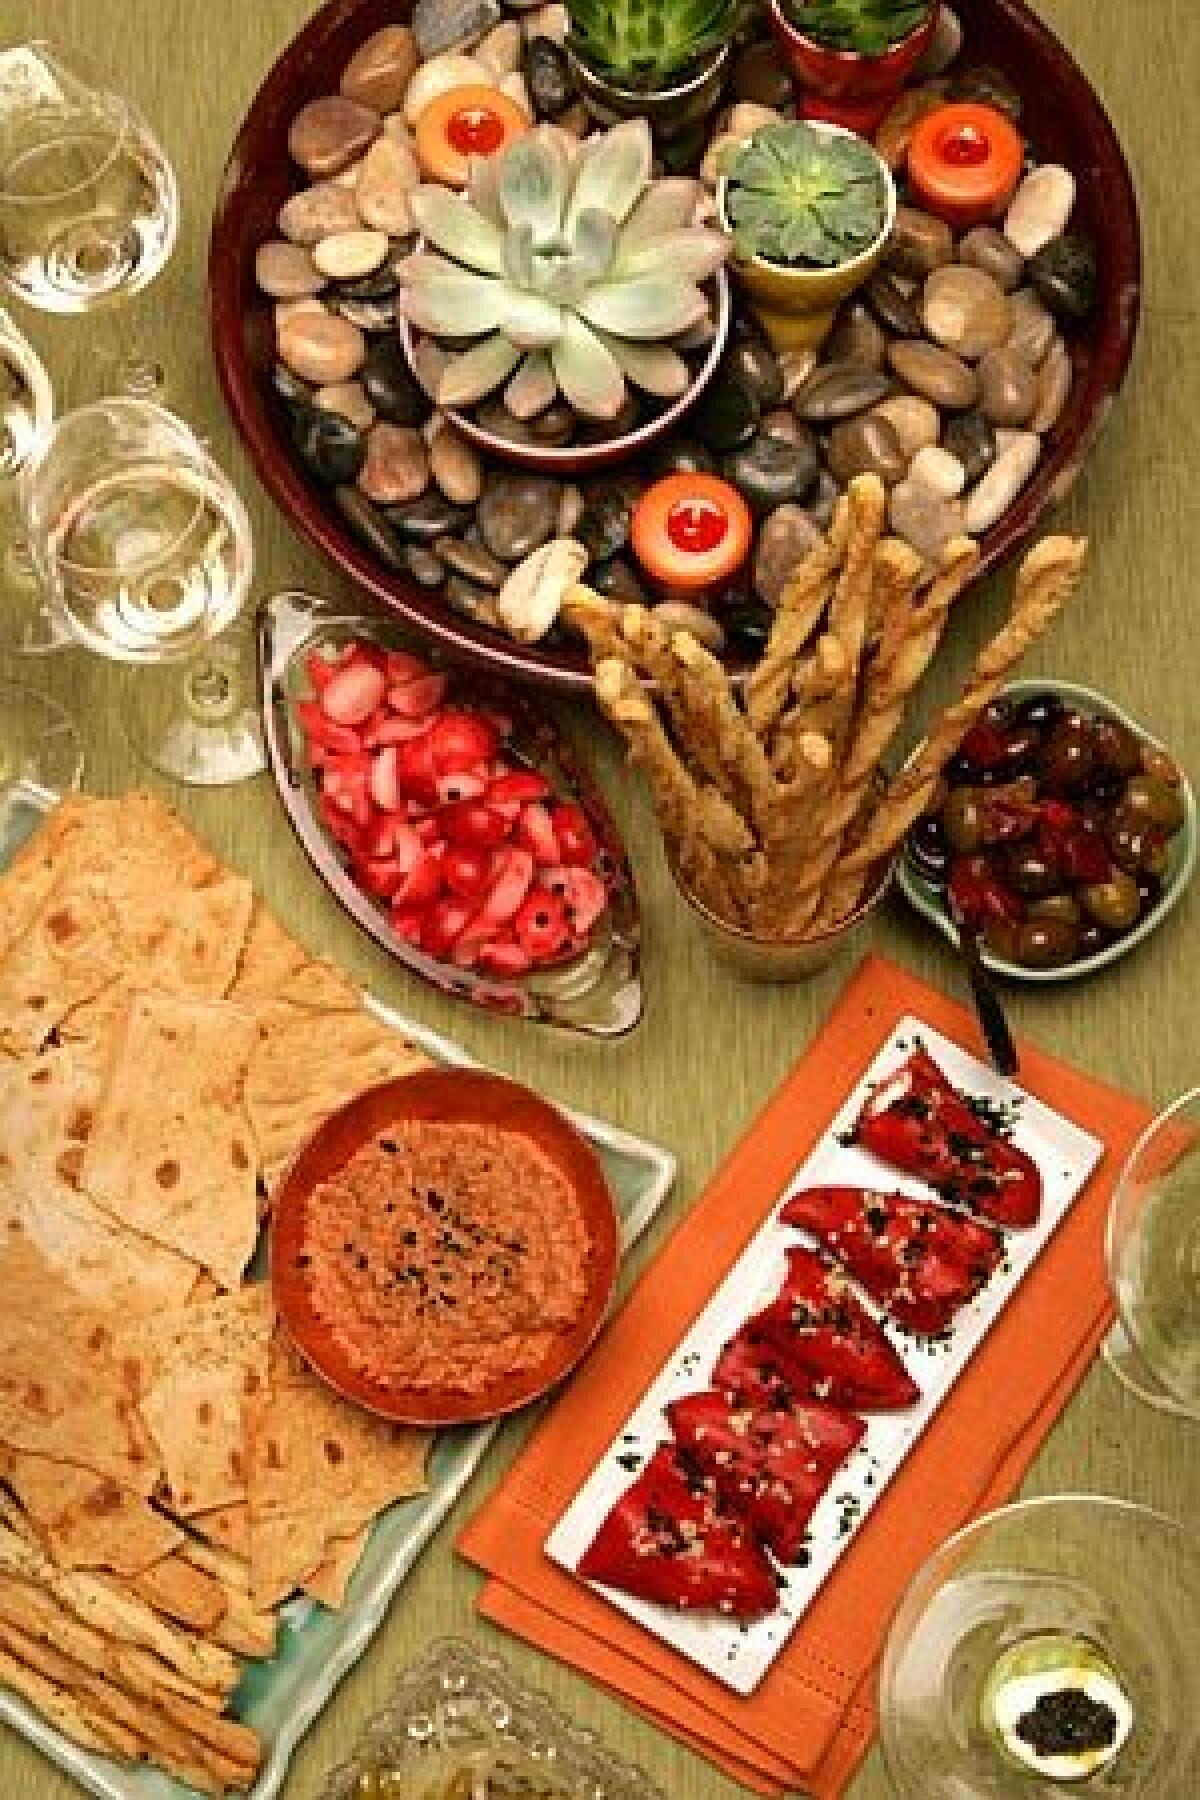 These easy-to-prepare appetizers require little or no oven time, yet go a long way toward making Thanksgiving dinner special. They include quick-pickled radishes, lavash crackers and muhammara, stuffed piquillo peppers and home-cured olives.